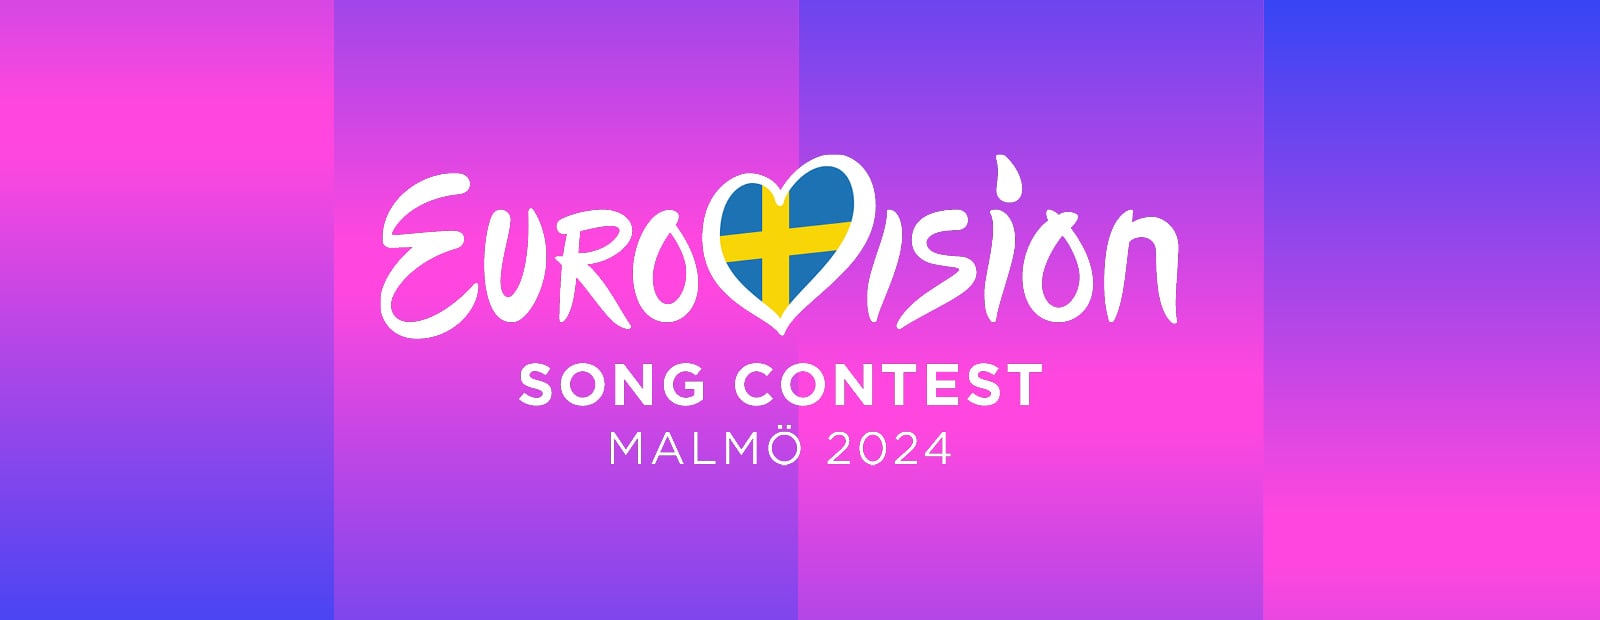 Eurovision Song Contest 2024 Grand Final - Live Show